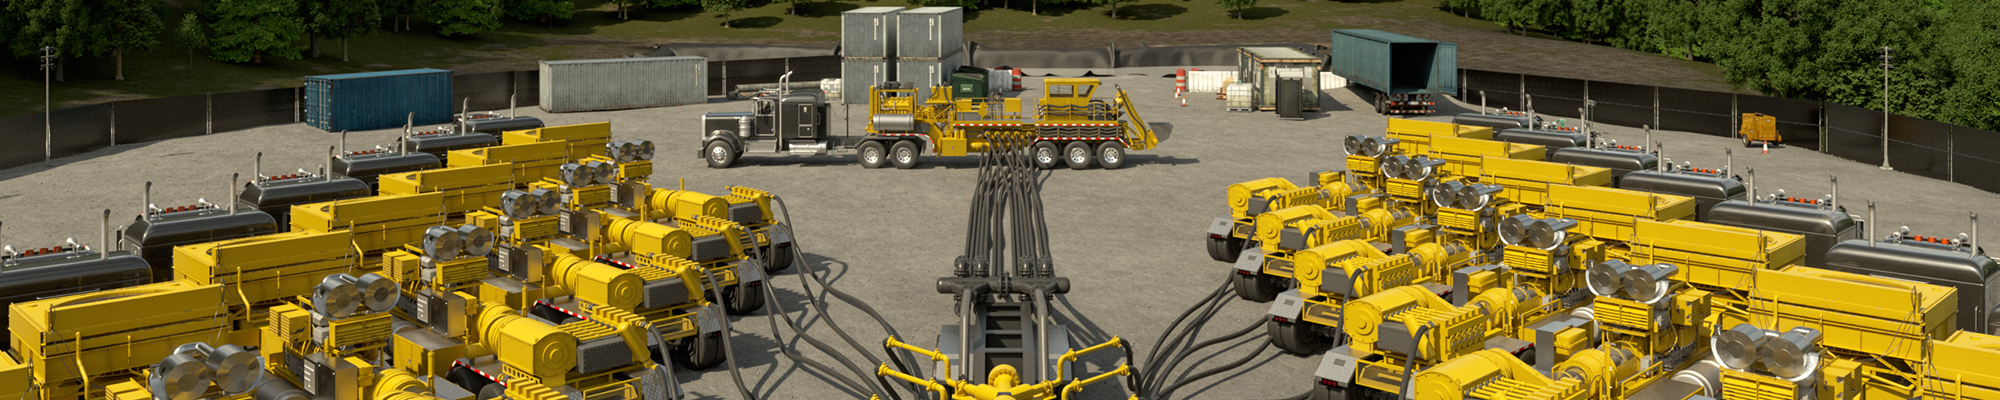 Oil and Gas Well Completions Trucks